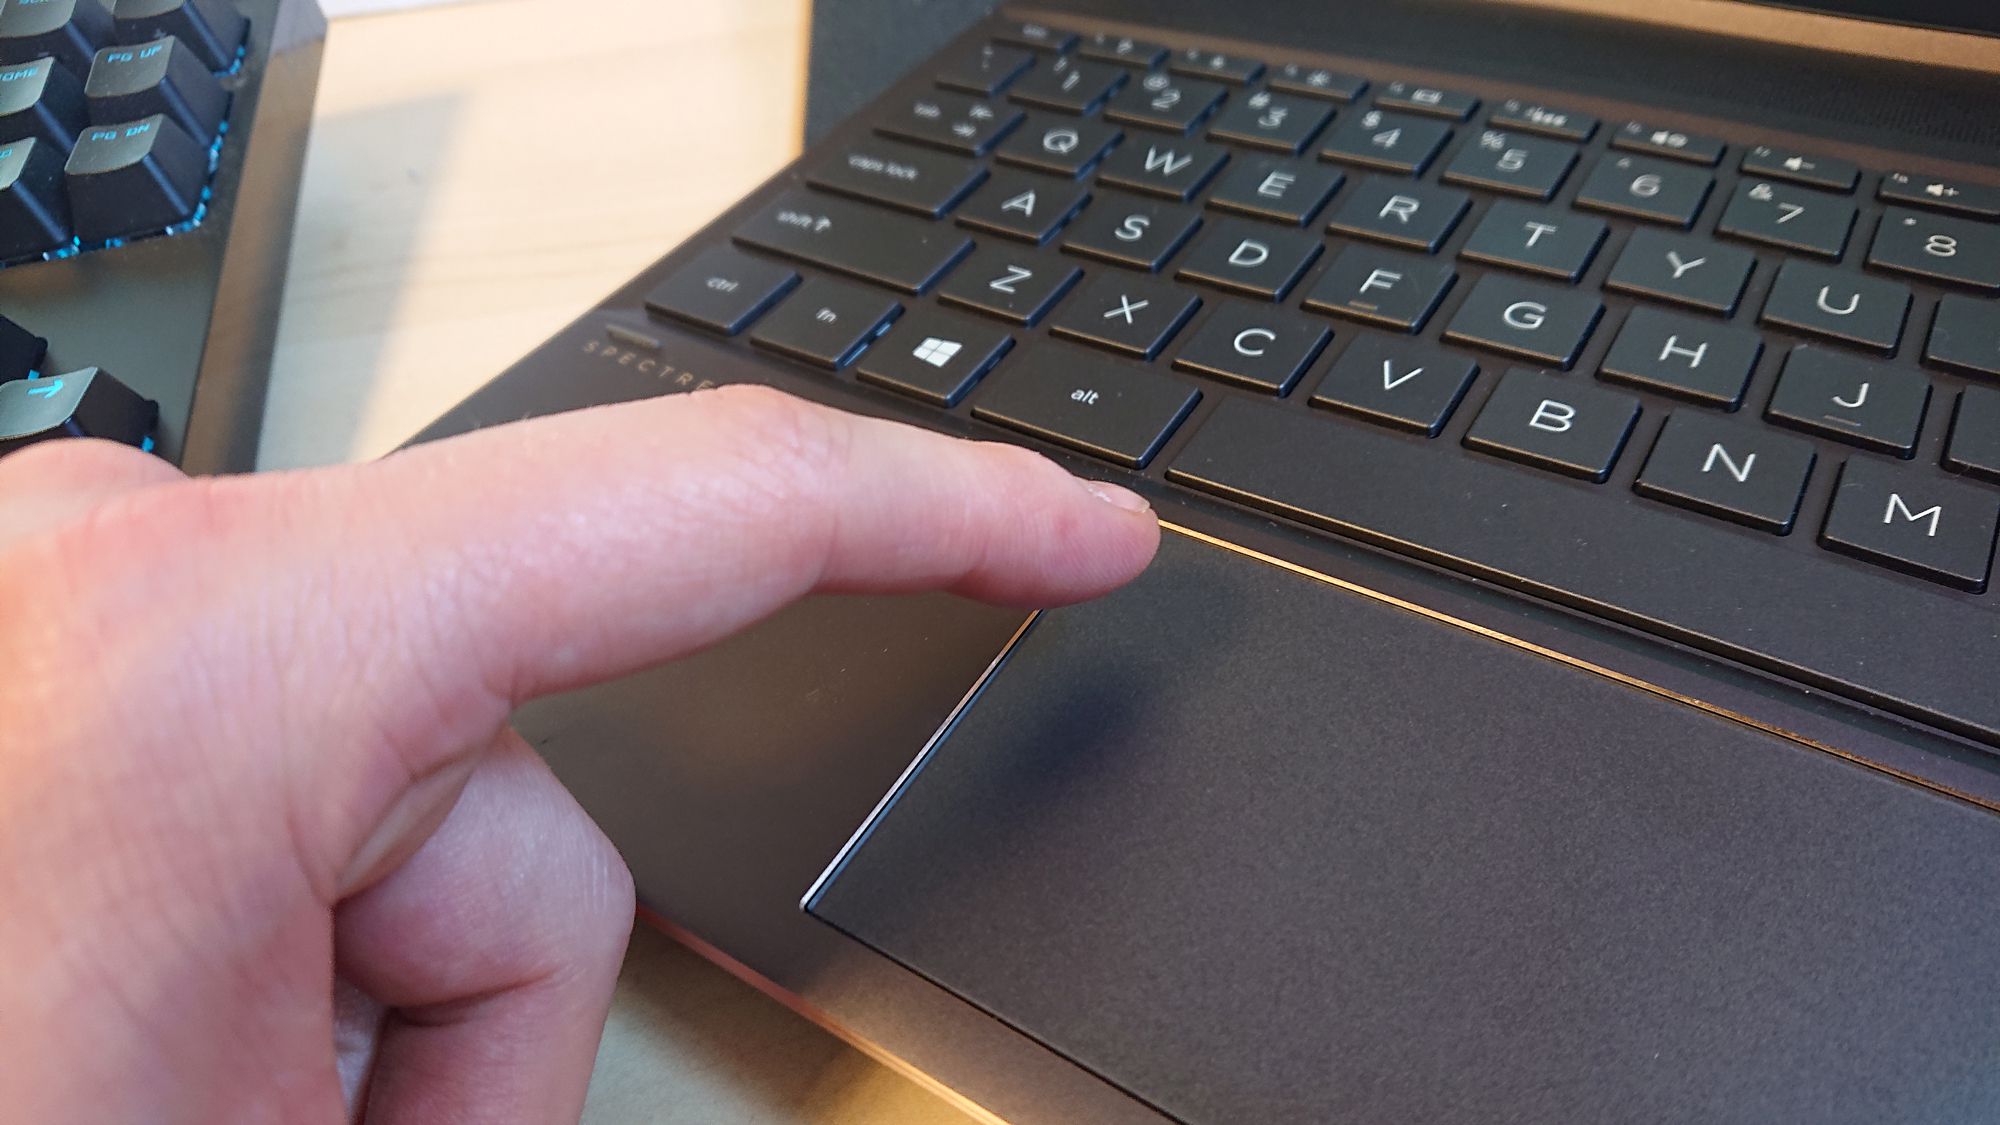 How To Unlock The Touchpad On A Laptop